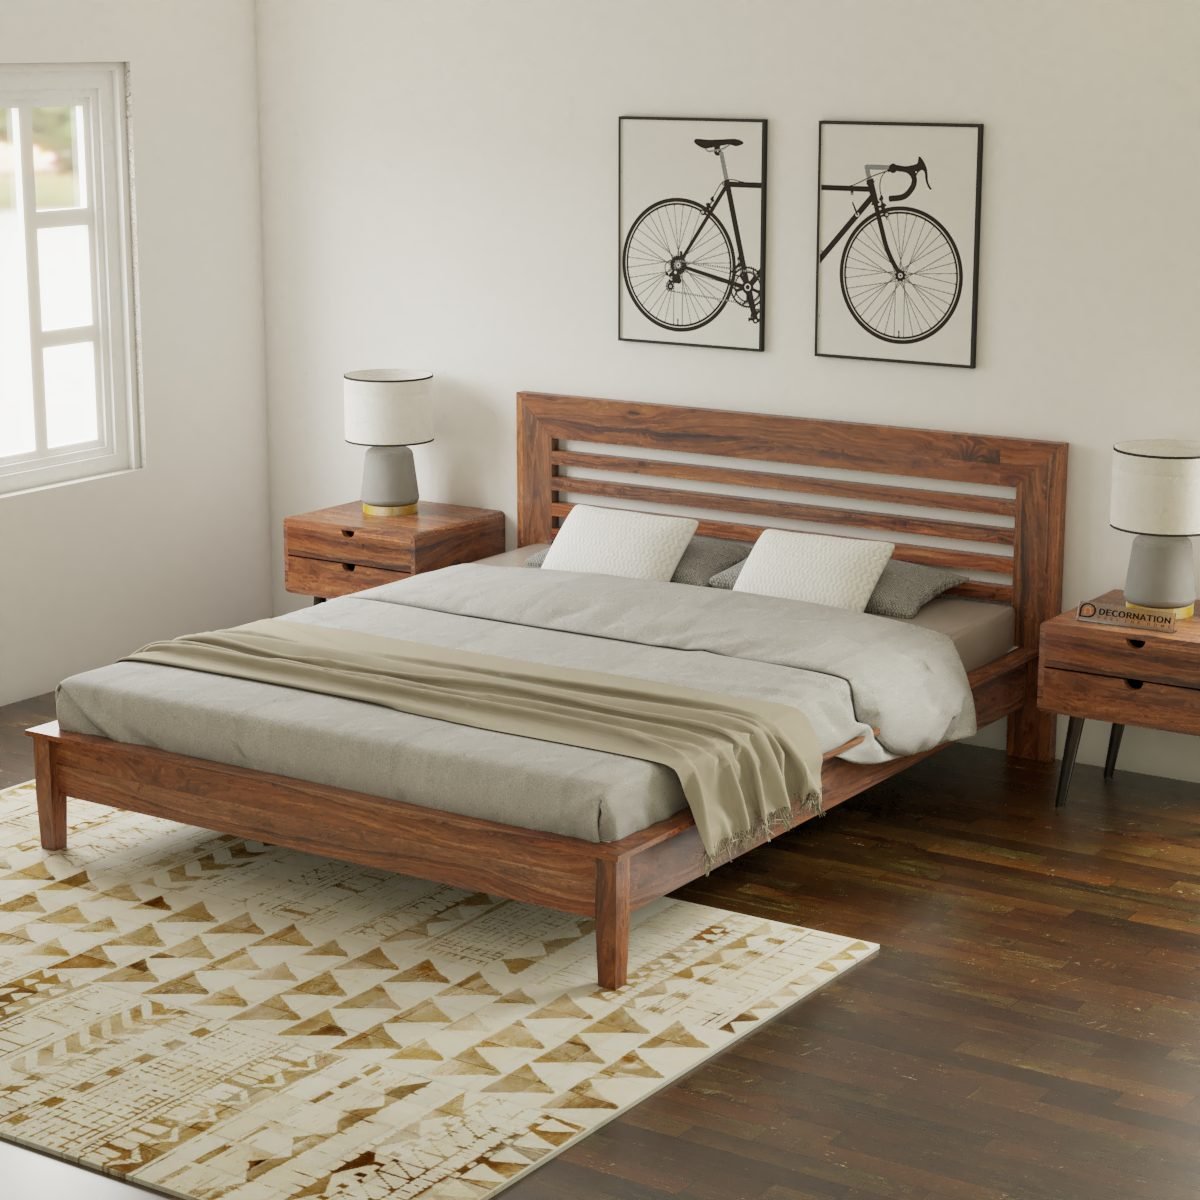 Silas wooden queen size bed